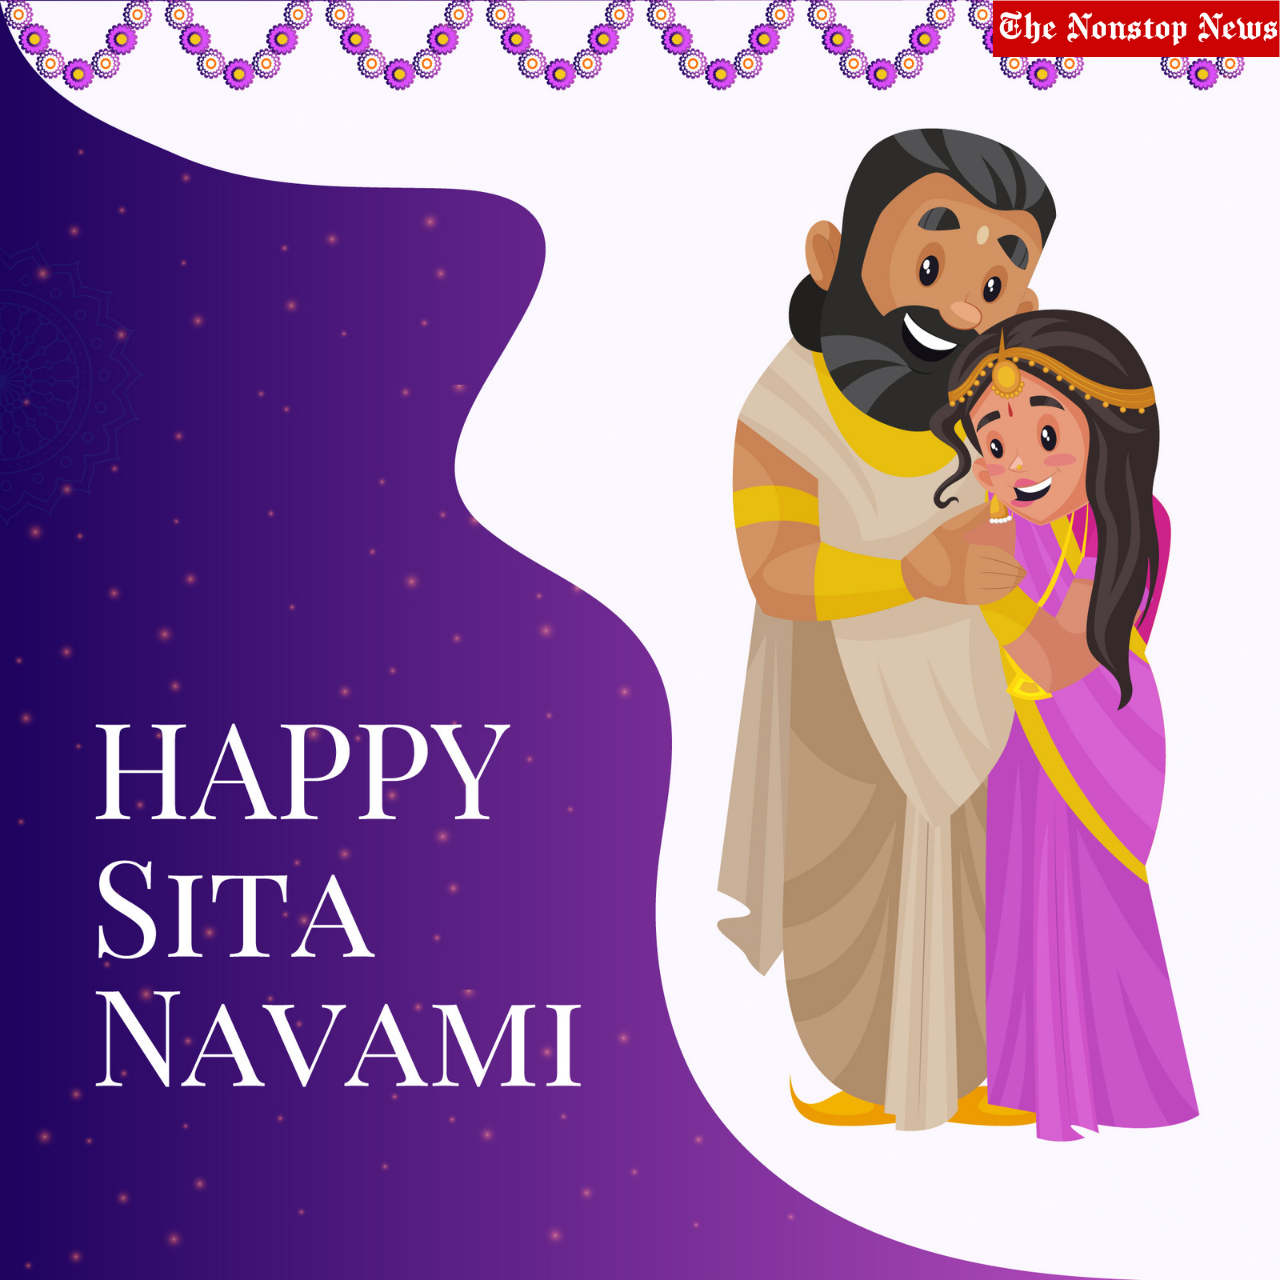 Happy Sita Navami 2022: Top Quotes, Wishes, HD Images, Messages, Greetings, Posters To Share